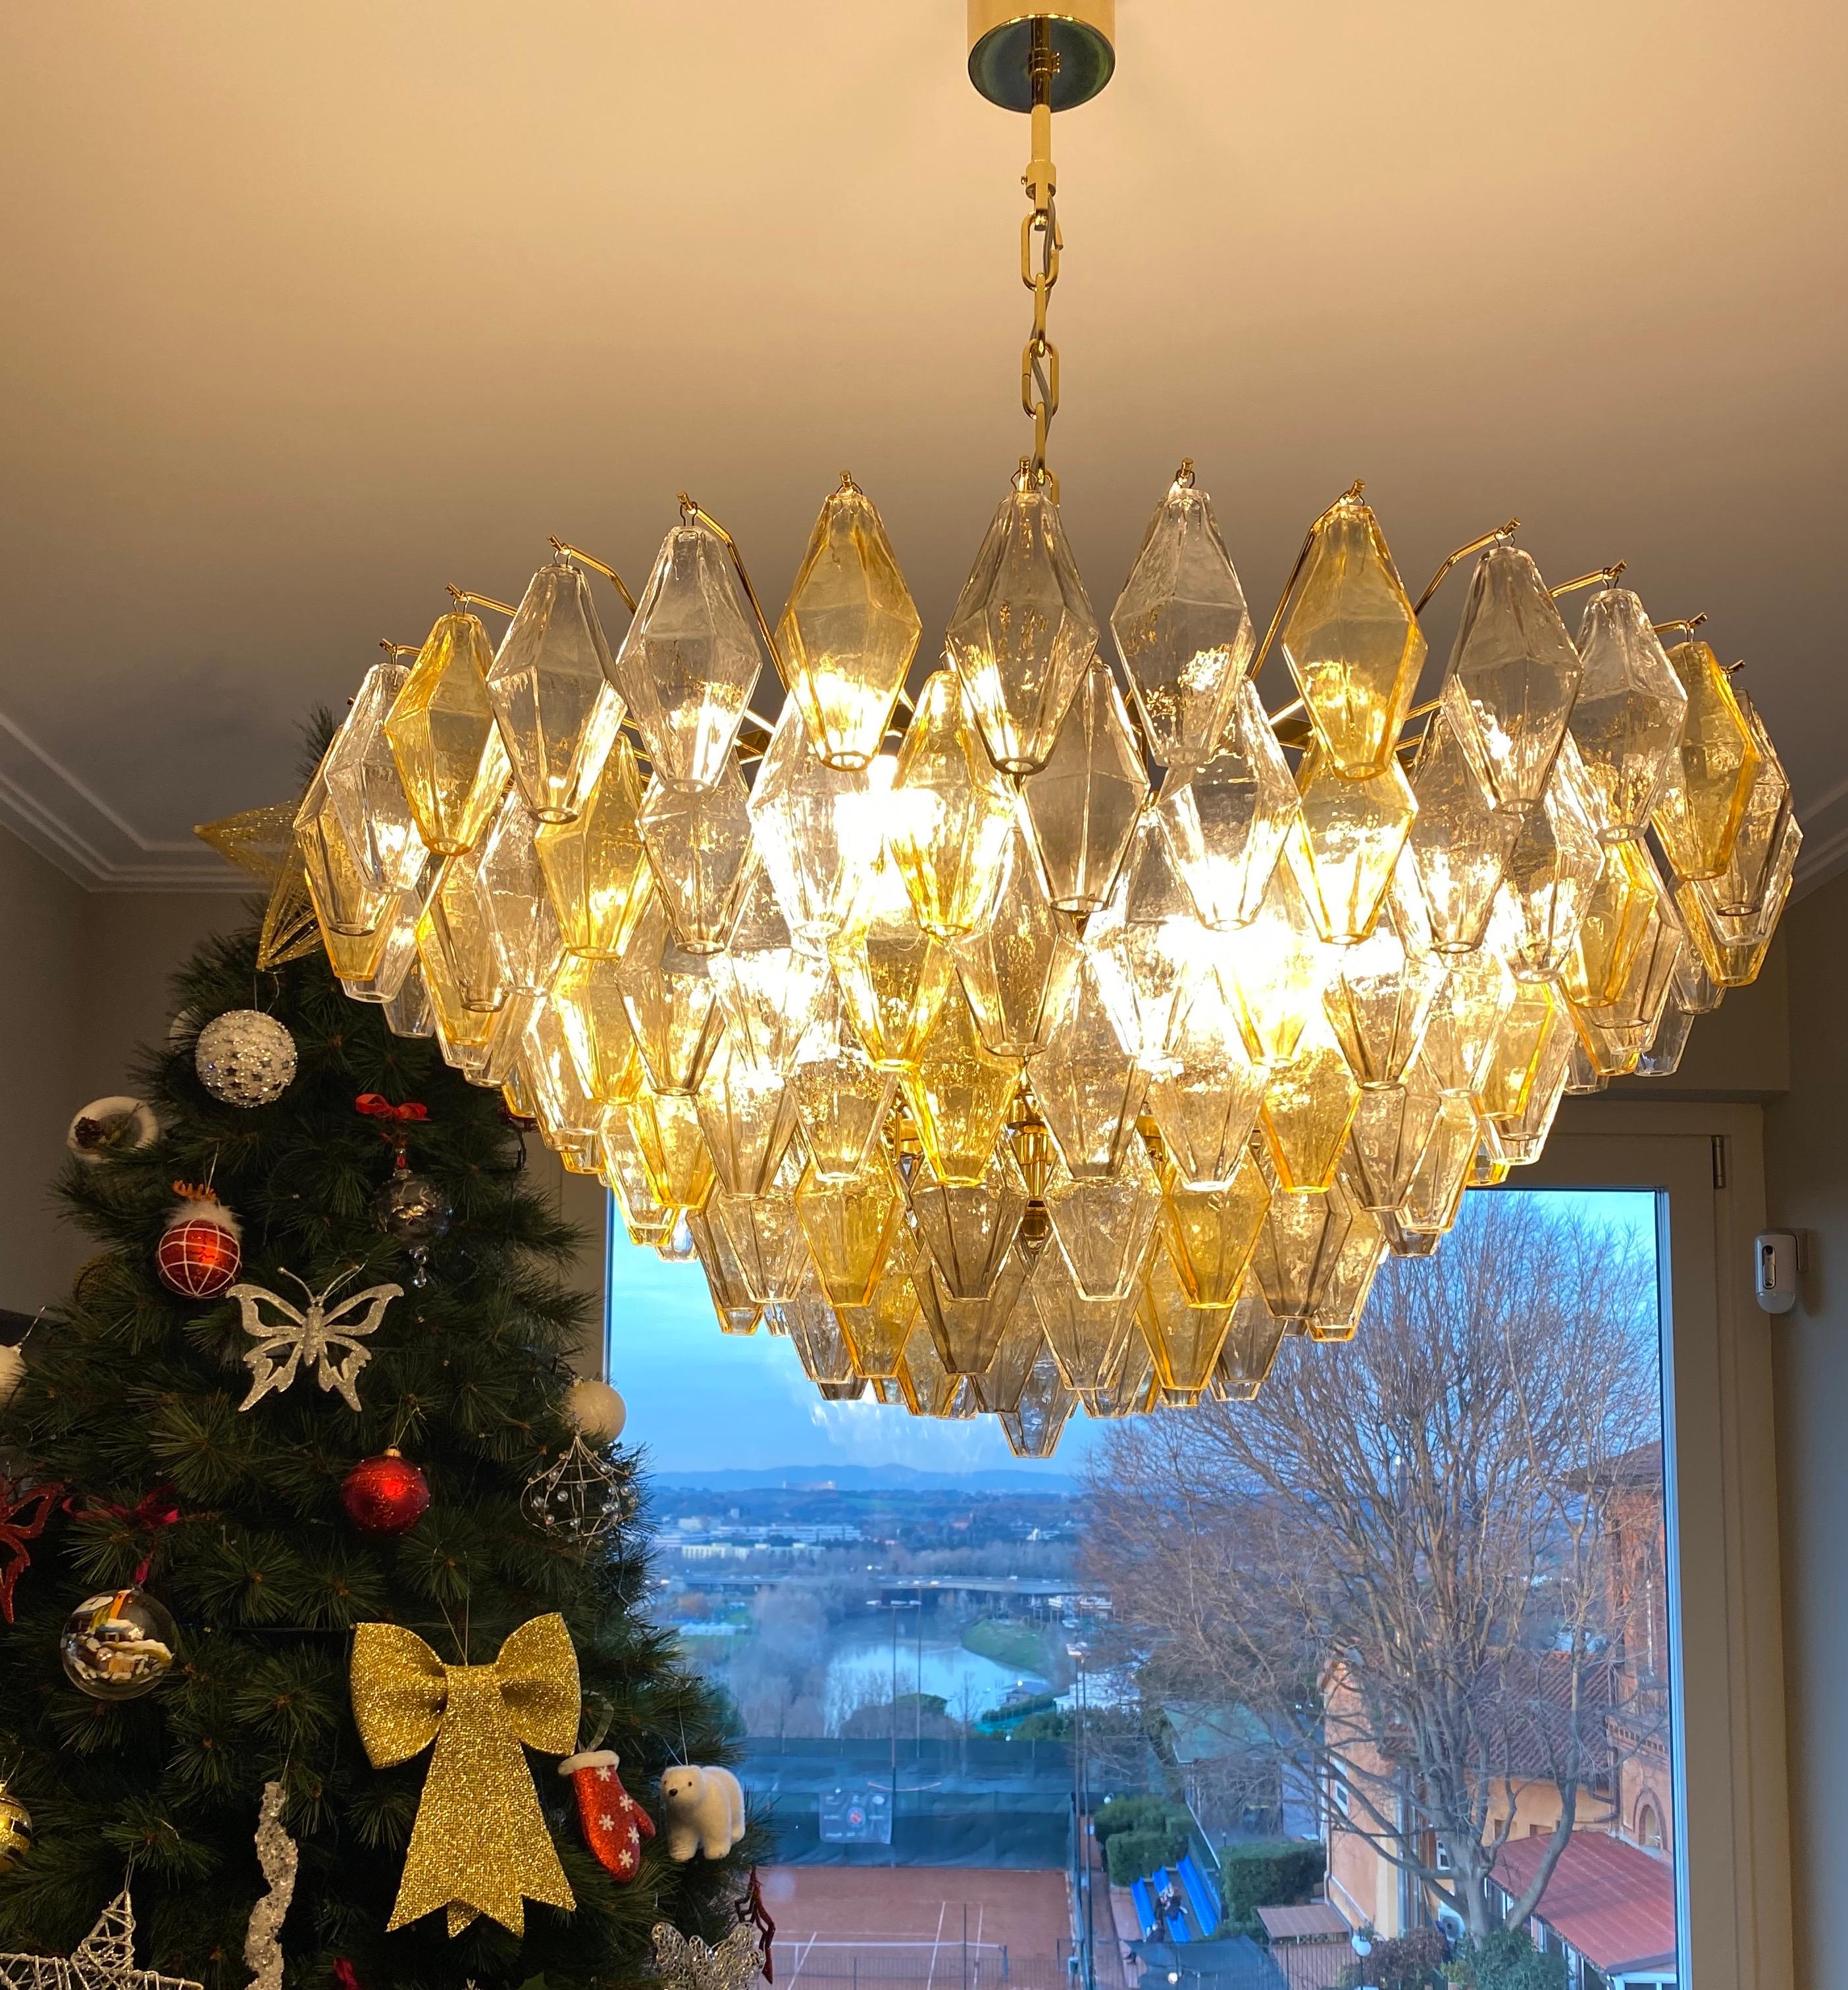 This chandelier consists dozens of hand blown gray, amber and clear 